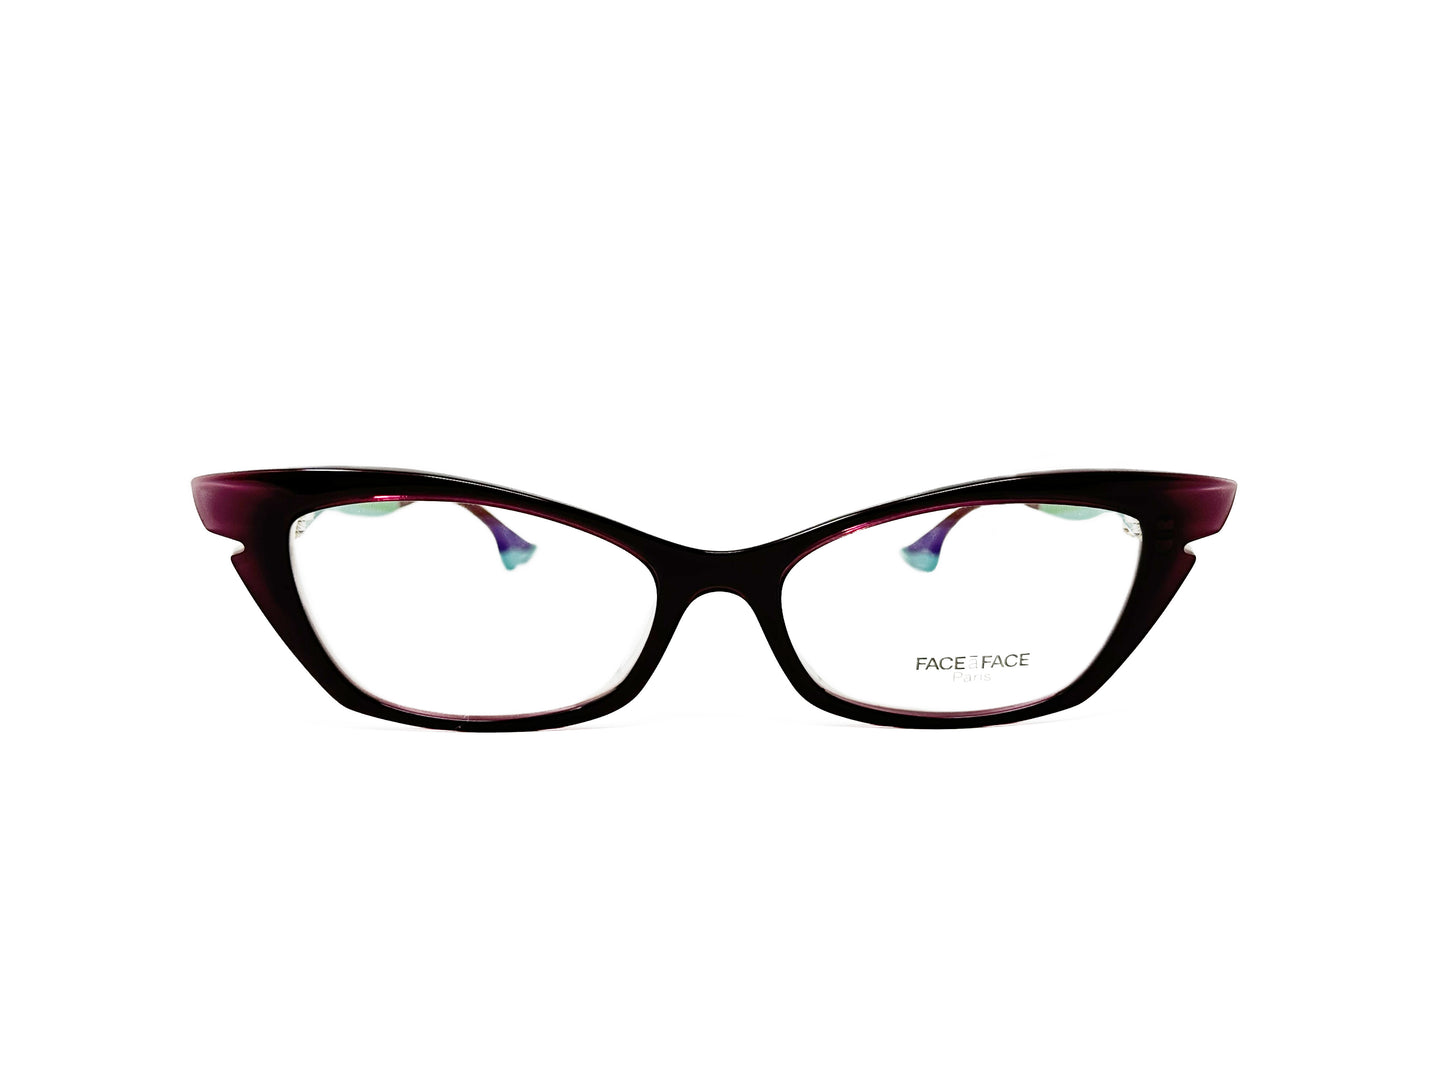 Face a Face narrow, cat-eye, acetate optical frame with temples that look like legs with heels on. Model: Sixties 1. Color: 501 - Black and Purple front with green temples. Front view. 